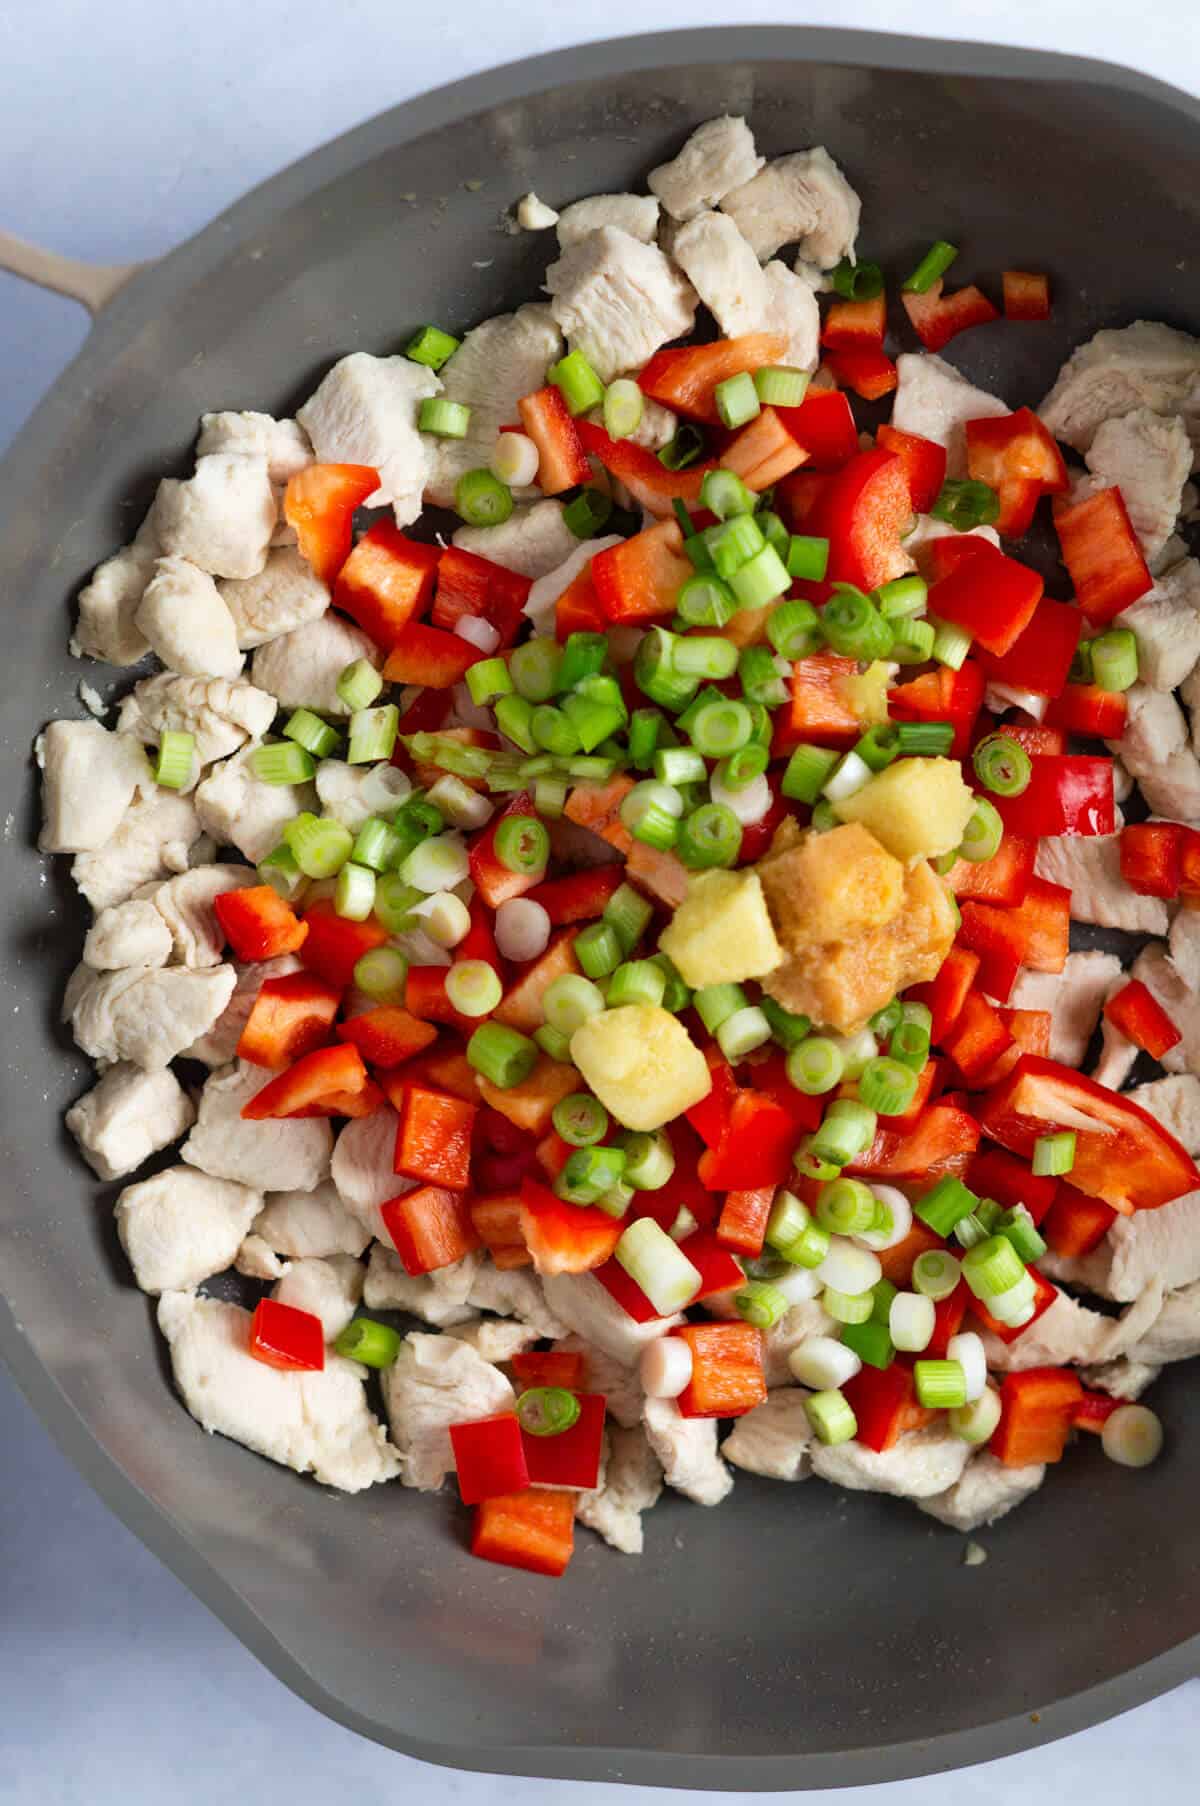 Pan of chicken, vegetables, and spices.